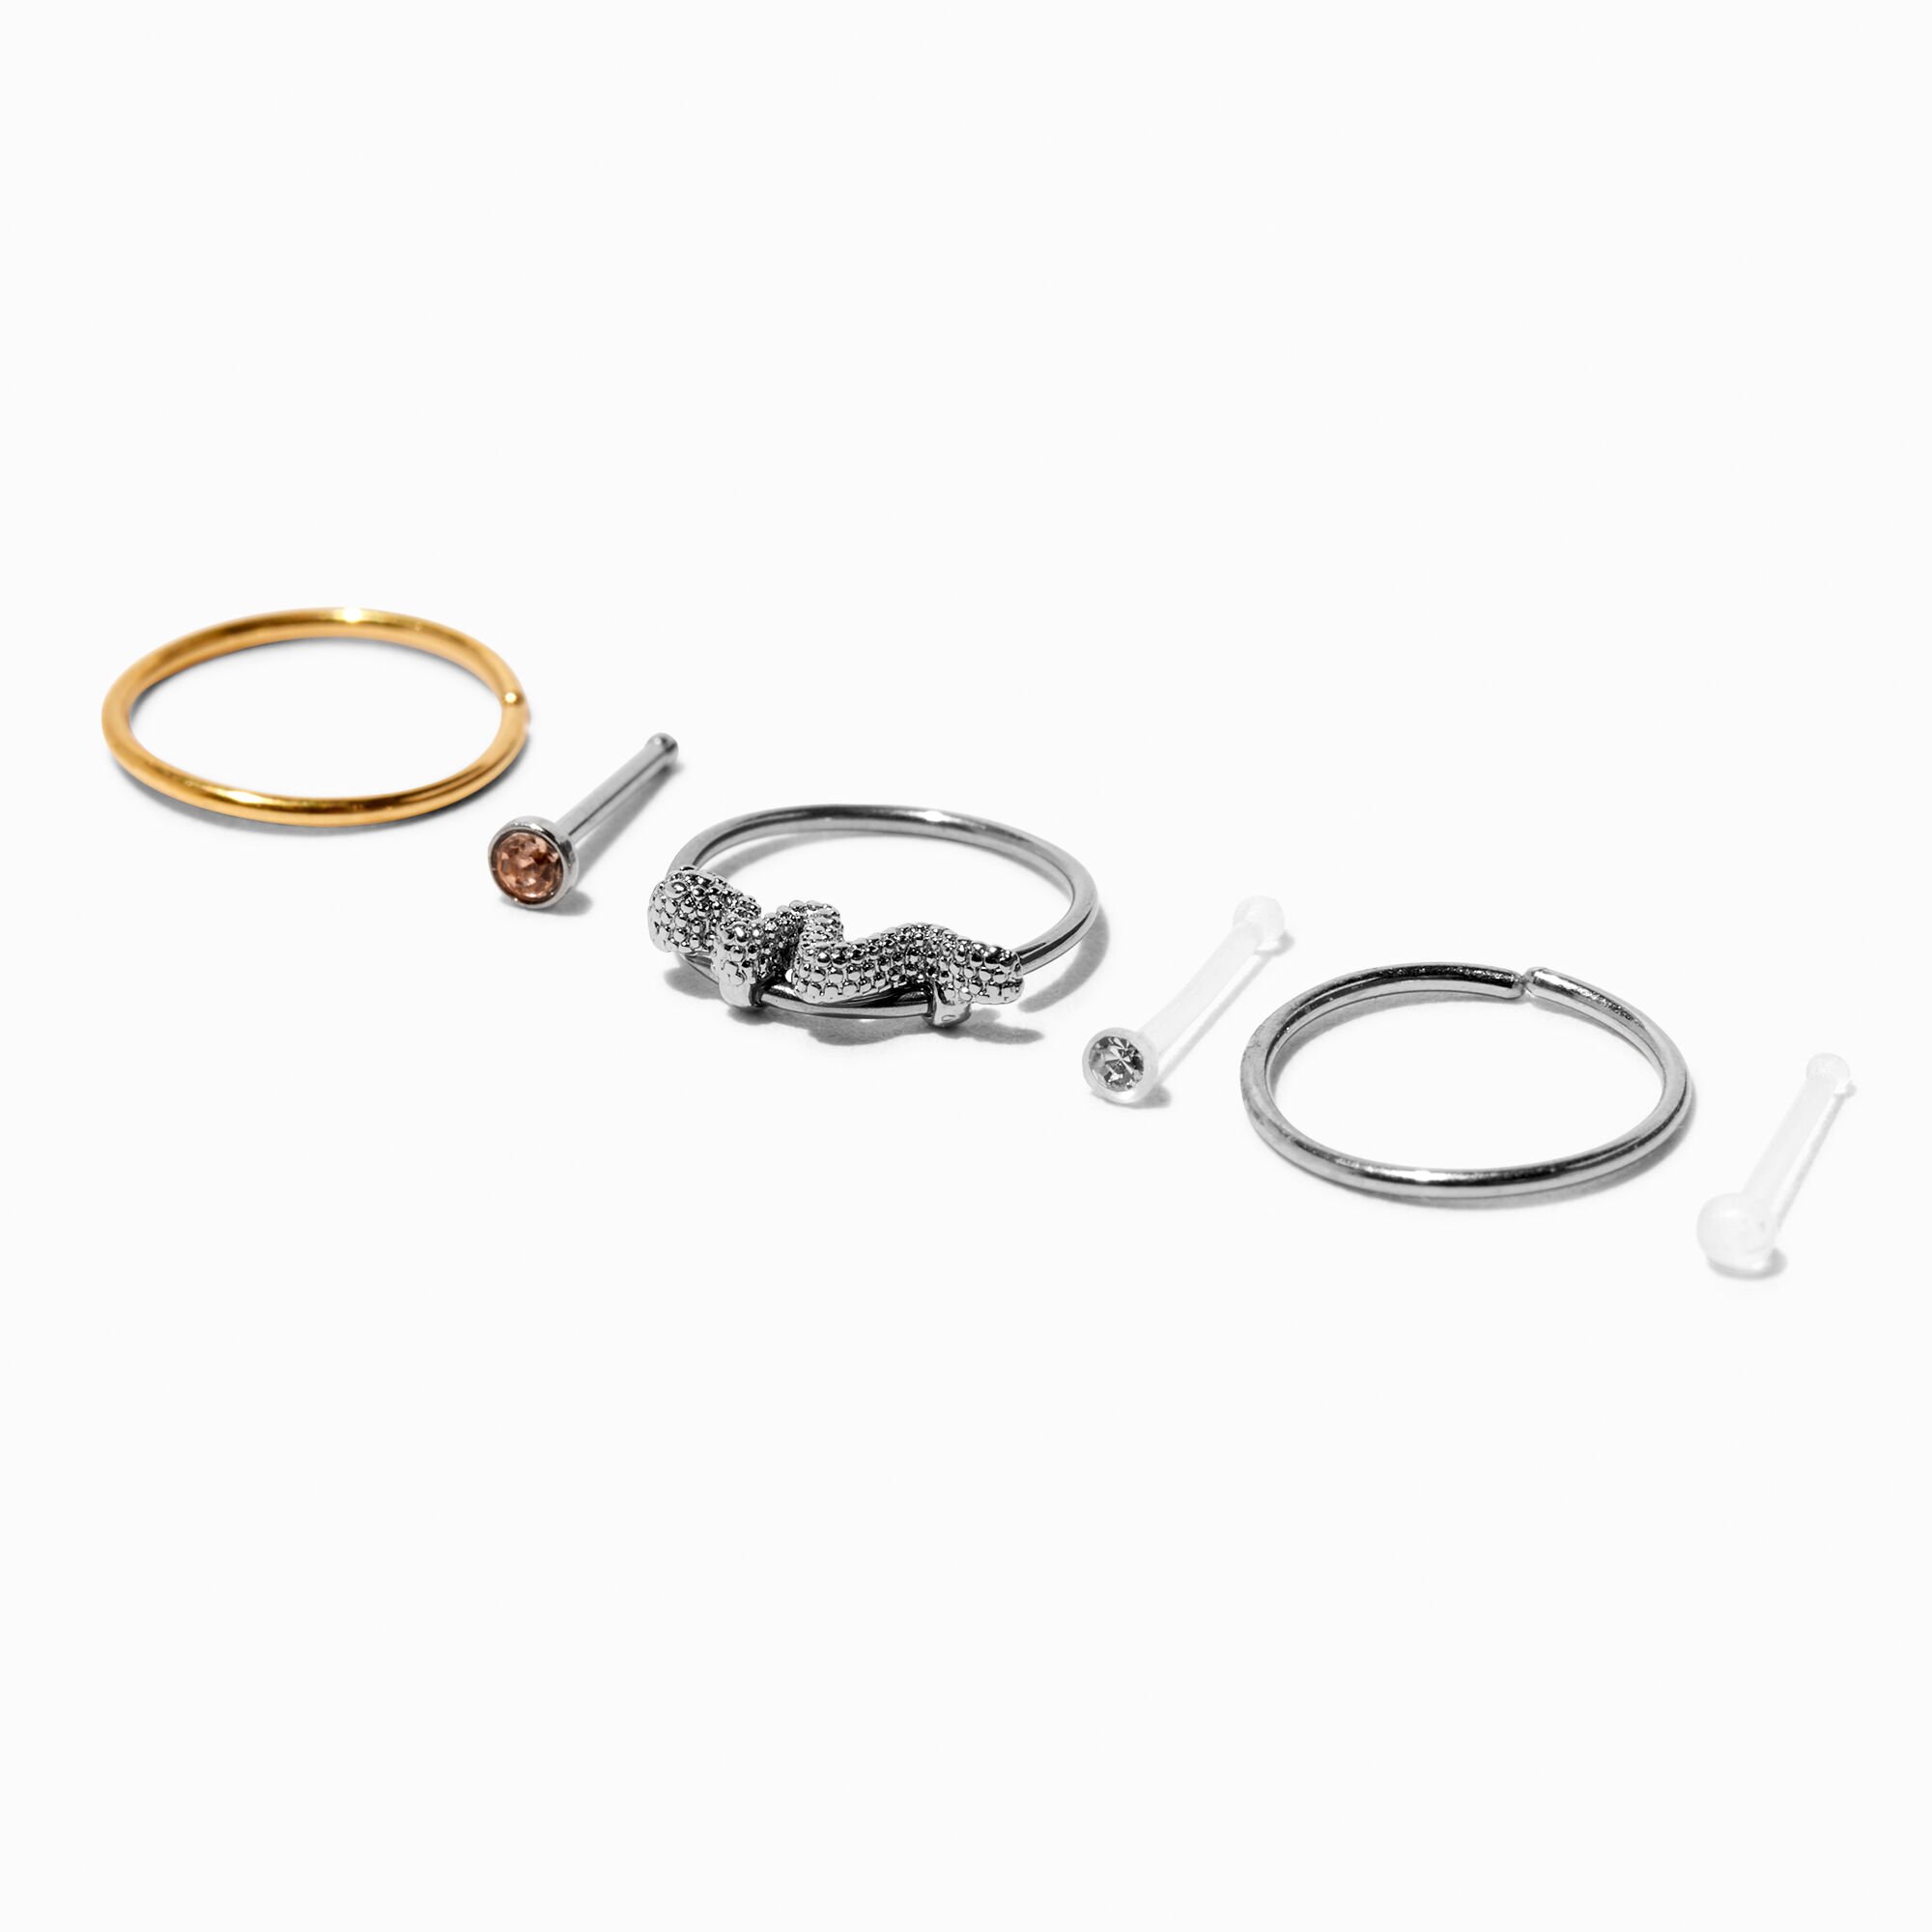 View Claires Mixed Metal 20G Retainer Stud Snake Hoop Nose Rings 6 Pack Gold information